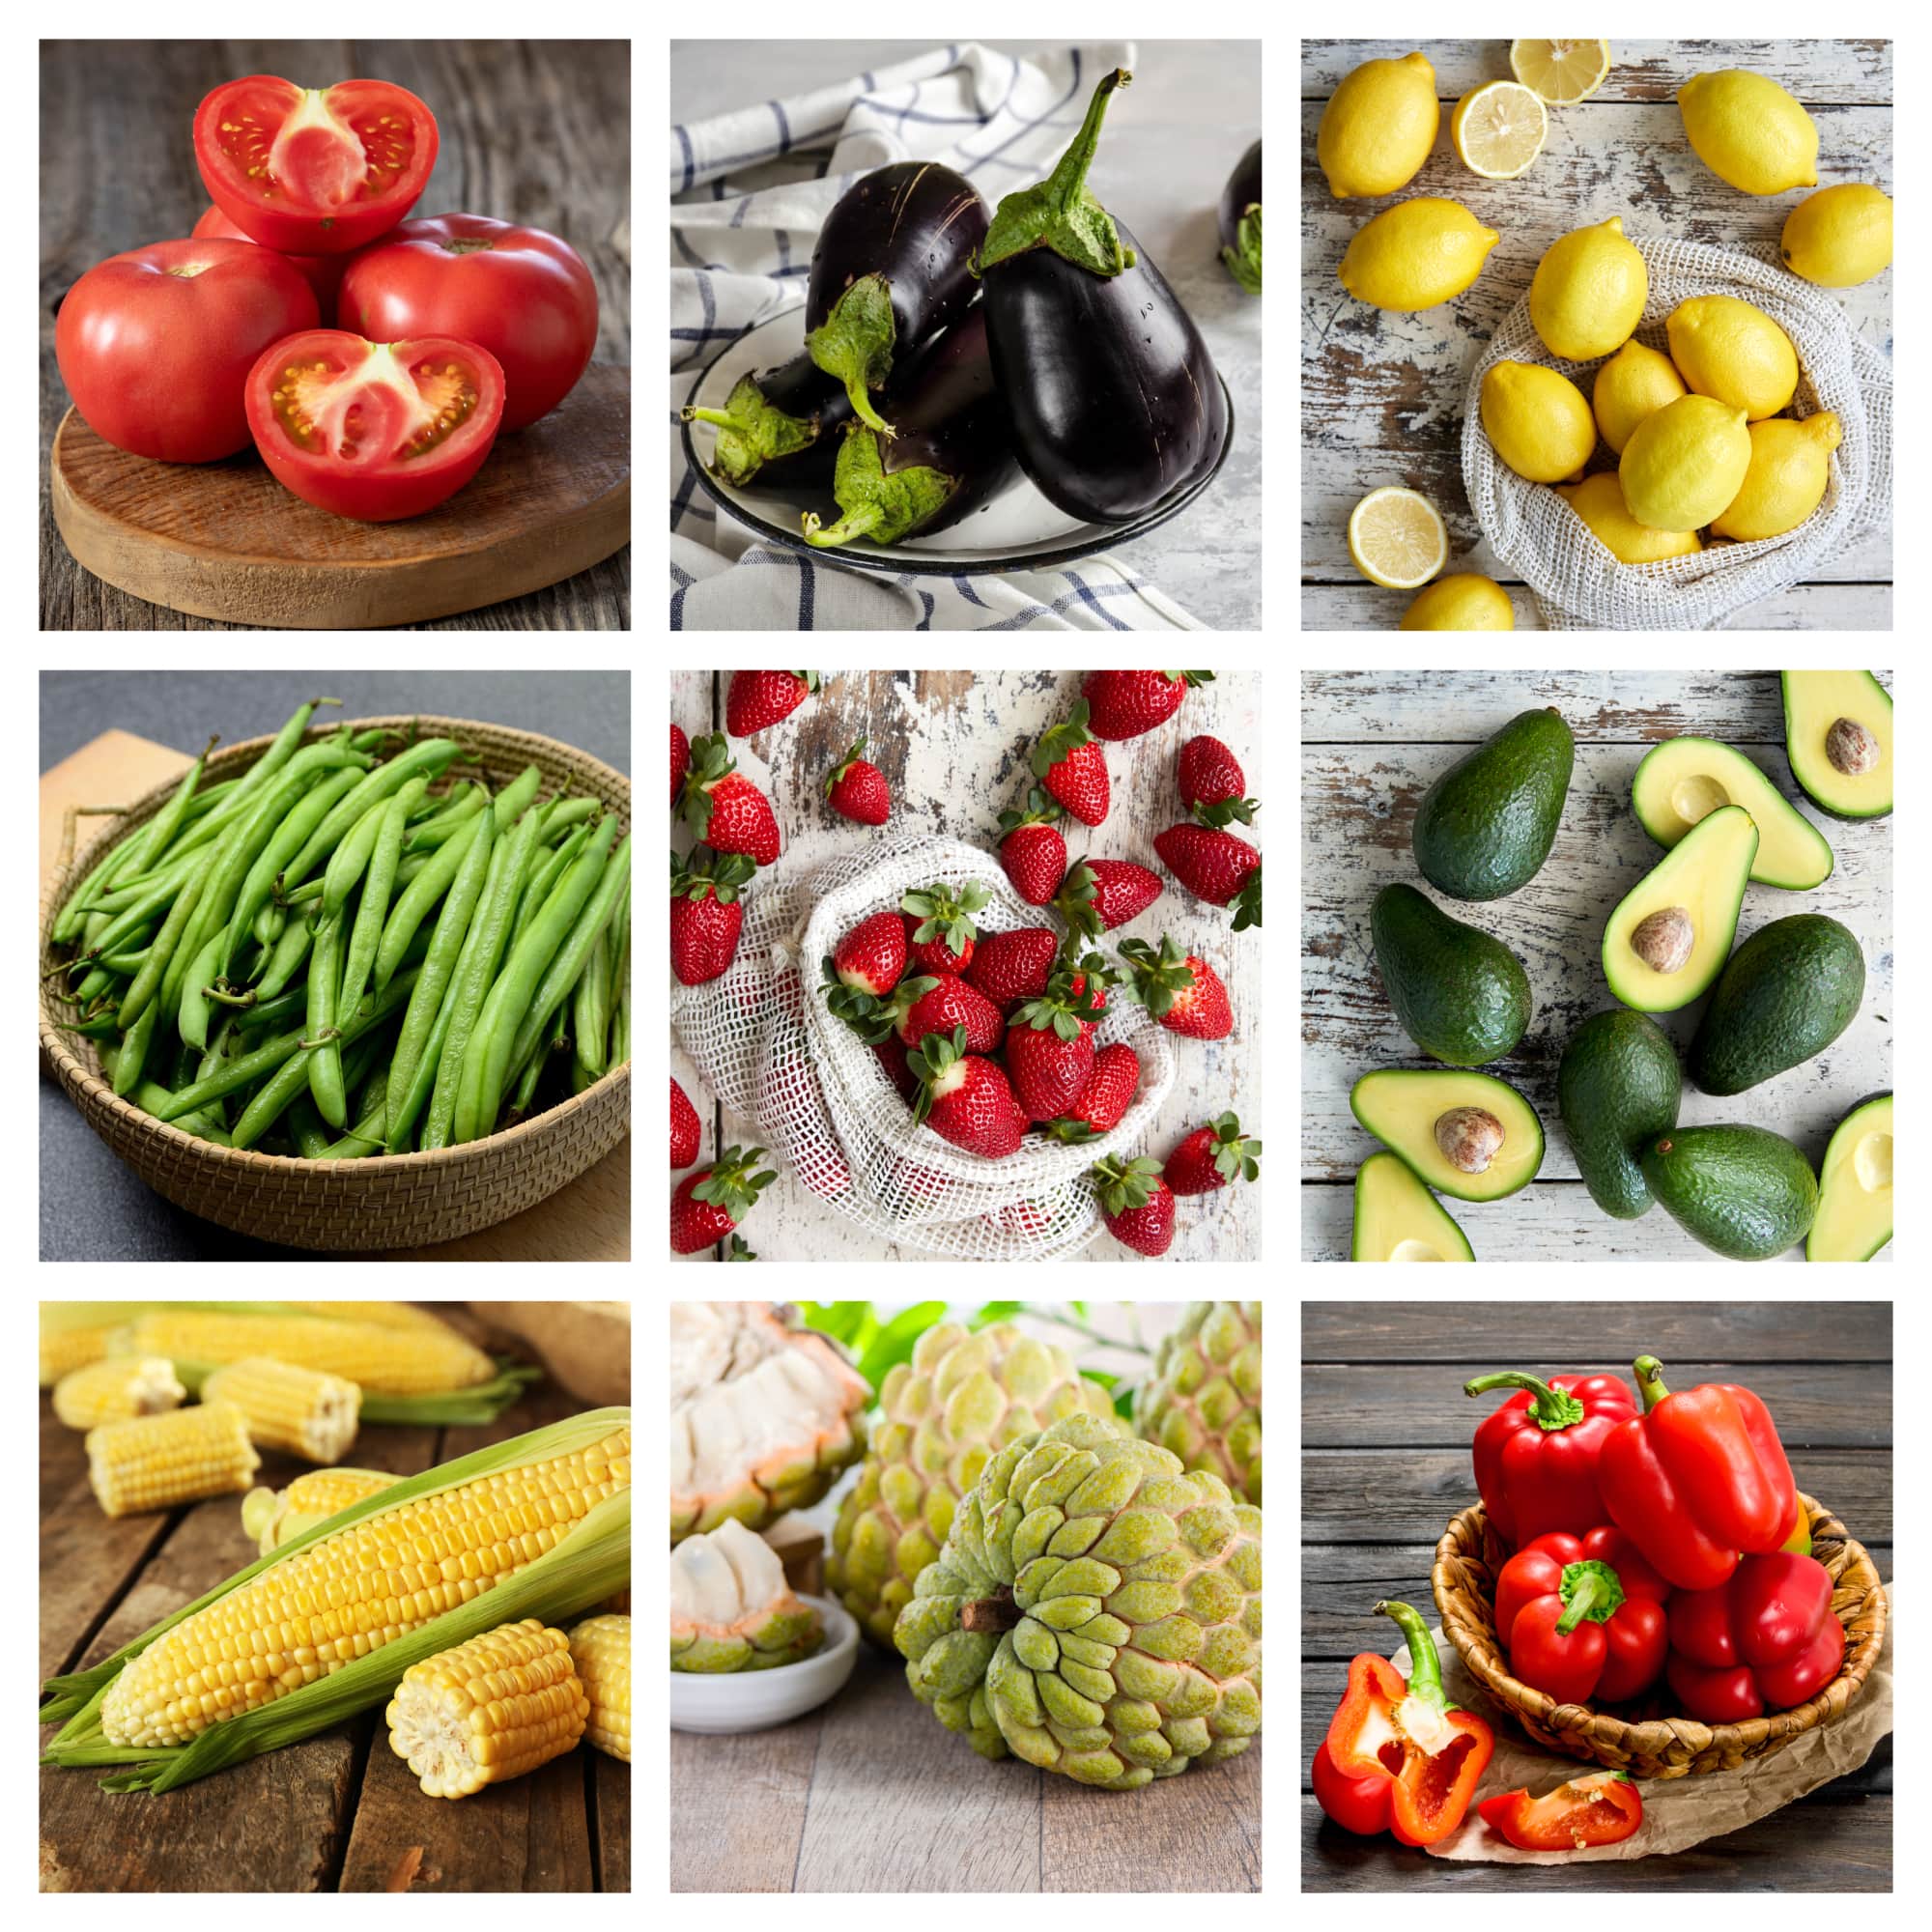 Dave's Market Update for the 28th June 2023 includes Queensland tomatoes, eggplant, lemons, beans, Queensland strawberries, avocados, corn, custard apples, and red capsicums.